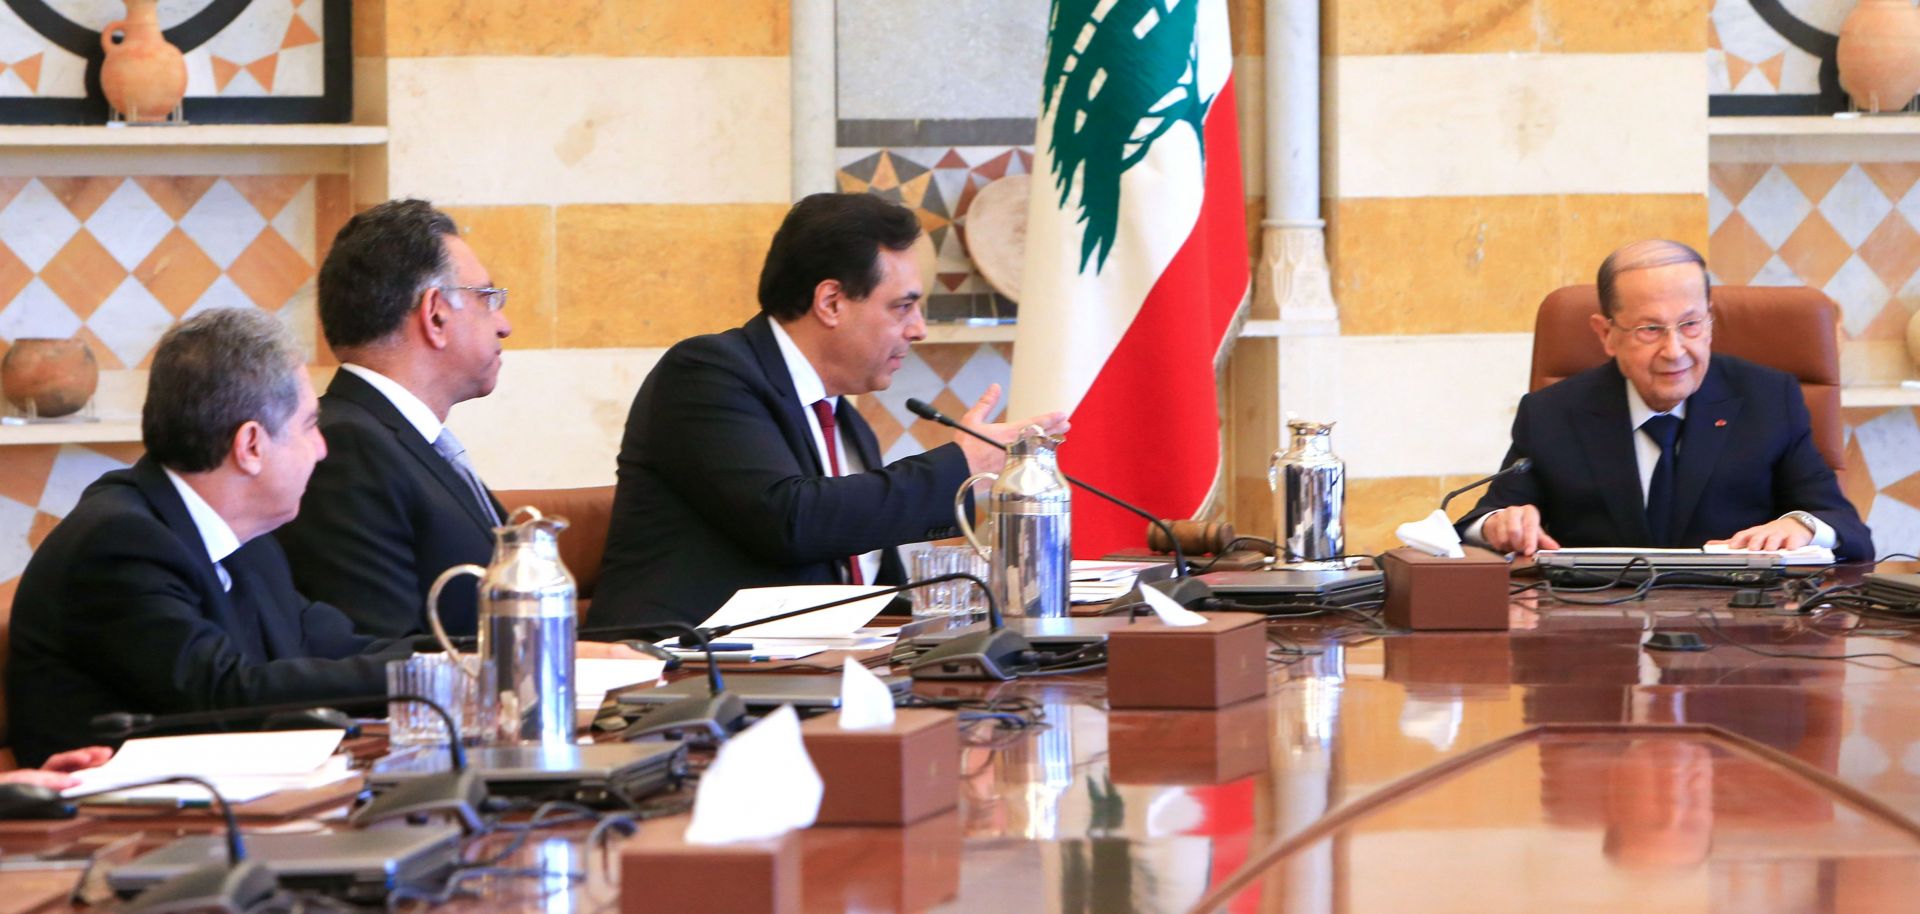 Lebanese President Michel Aoun (R) heads the first meeting of Prime Minister Hassan Diab's (C) newly constituted government in Beirut on Jan. 22, 2020.